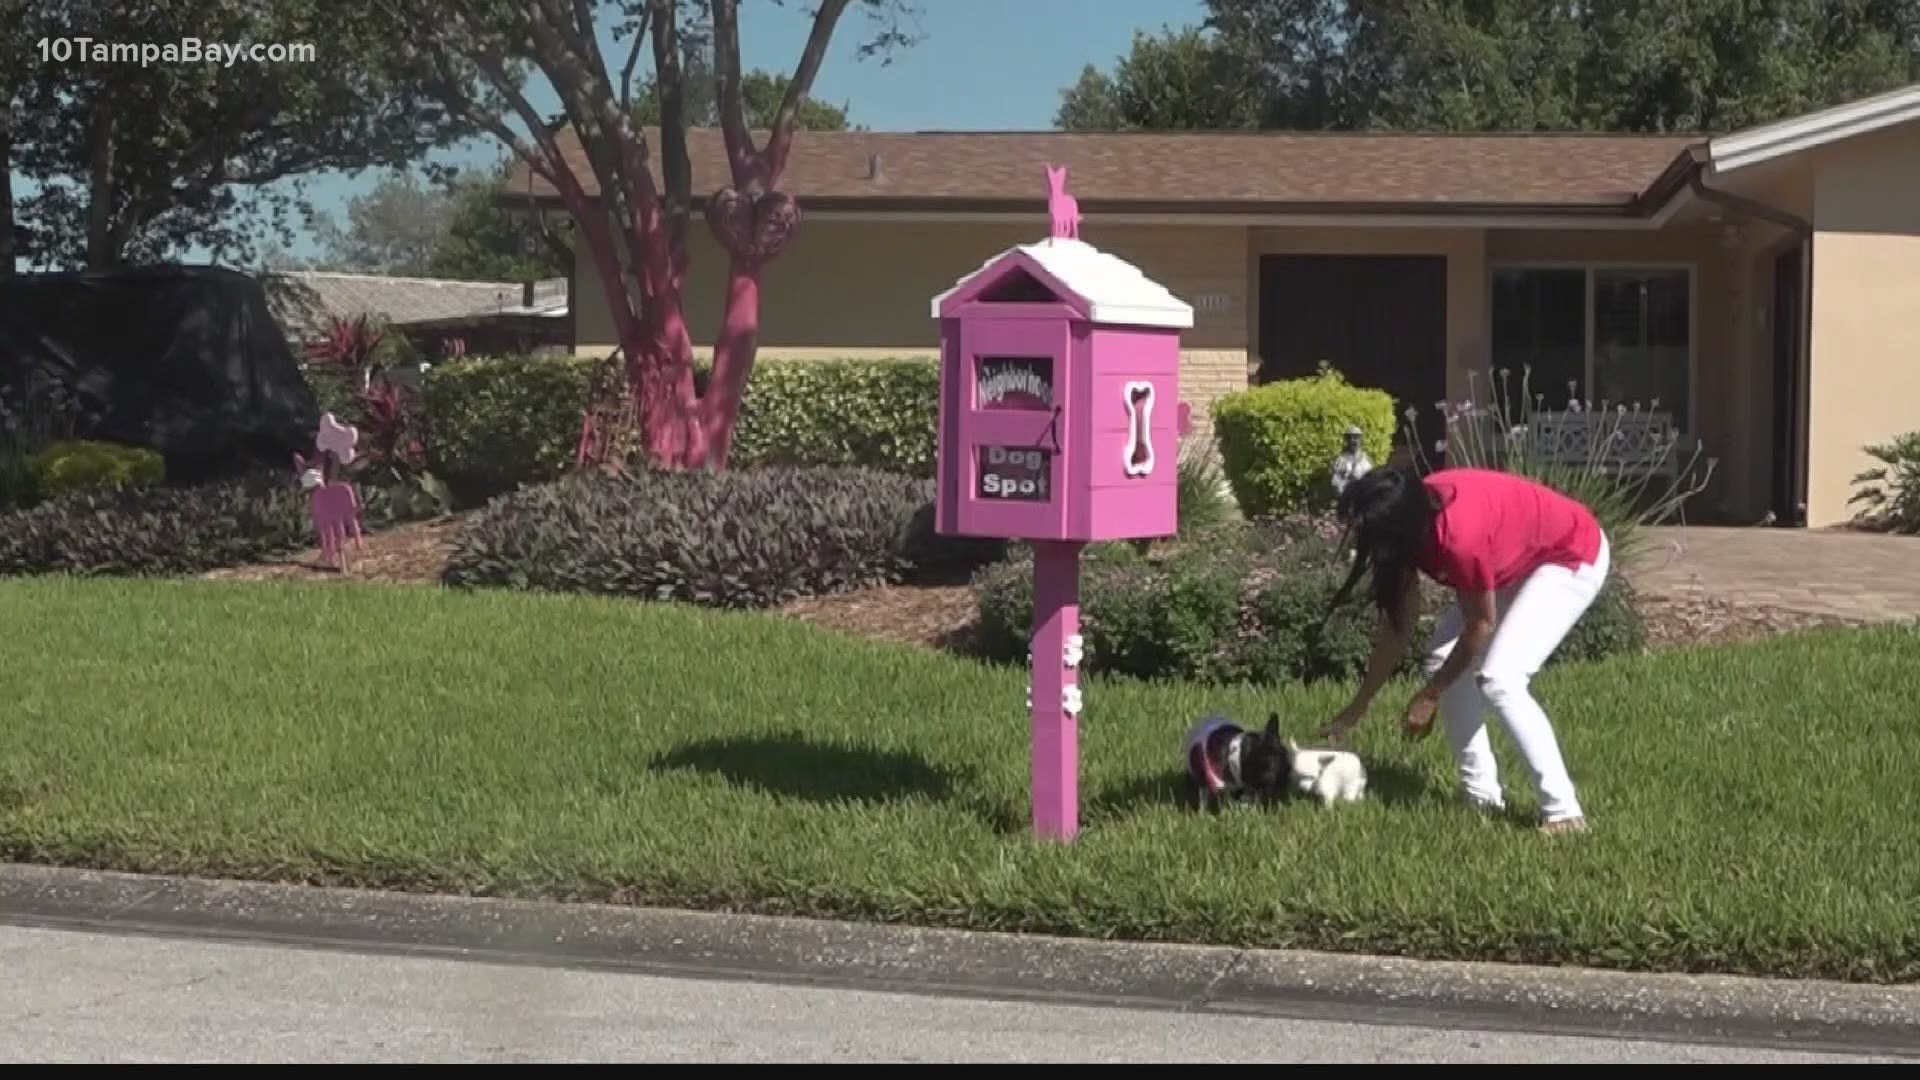 St. Petersburg code enforcement cited Jaime McKnight for the community box she put in her front yard for neighbors and their dogs.